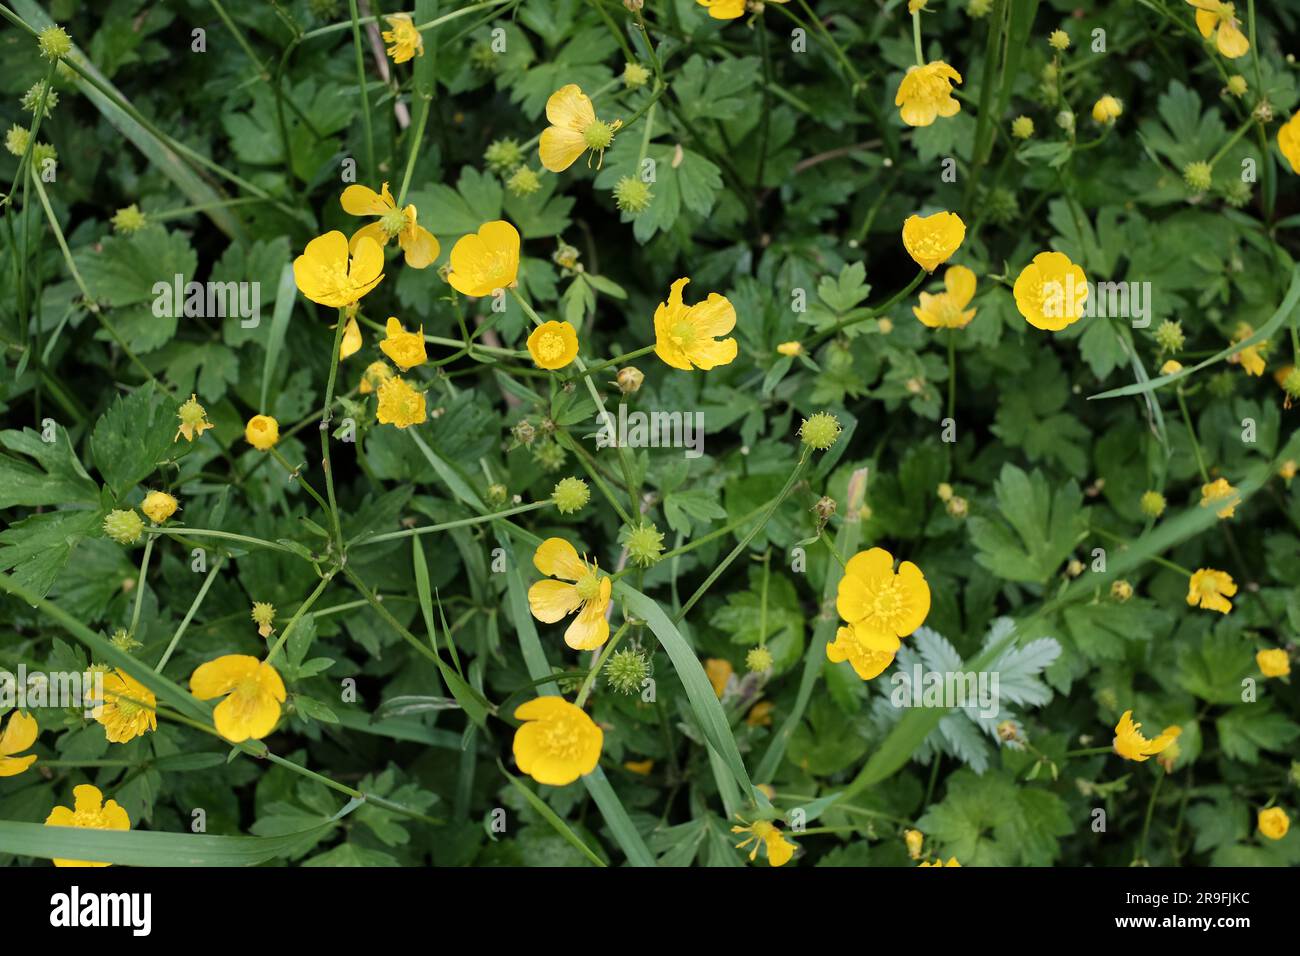 Nature's golden beauty in a meadow: vibrant buttercup flowers bring art to the spring landscape. Stock Photo